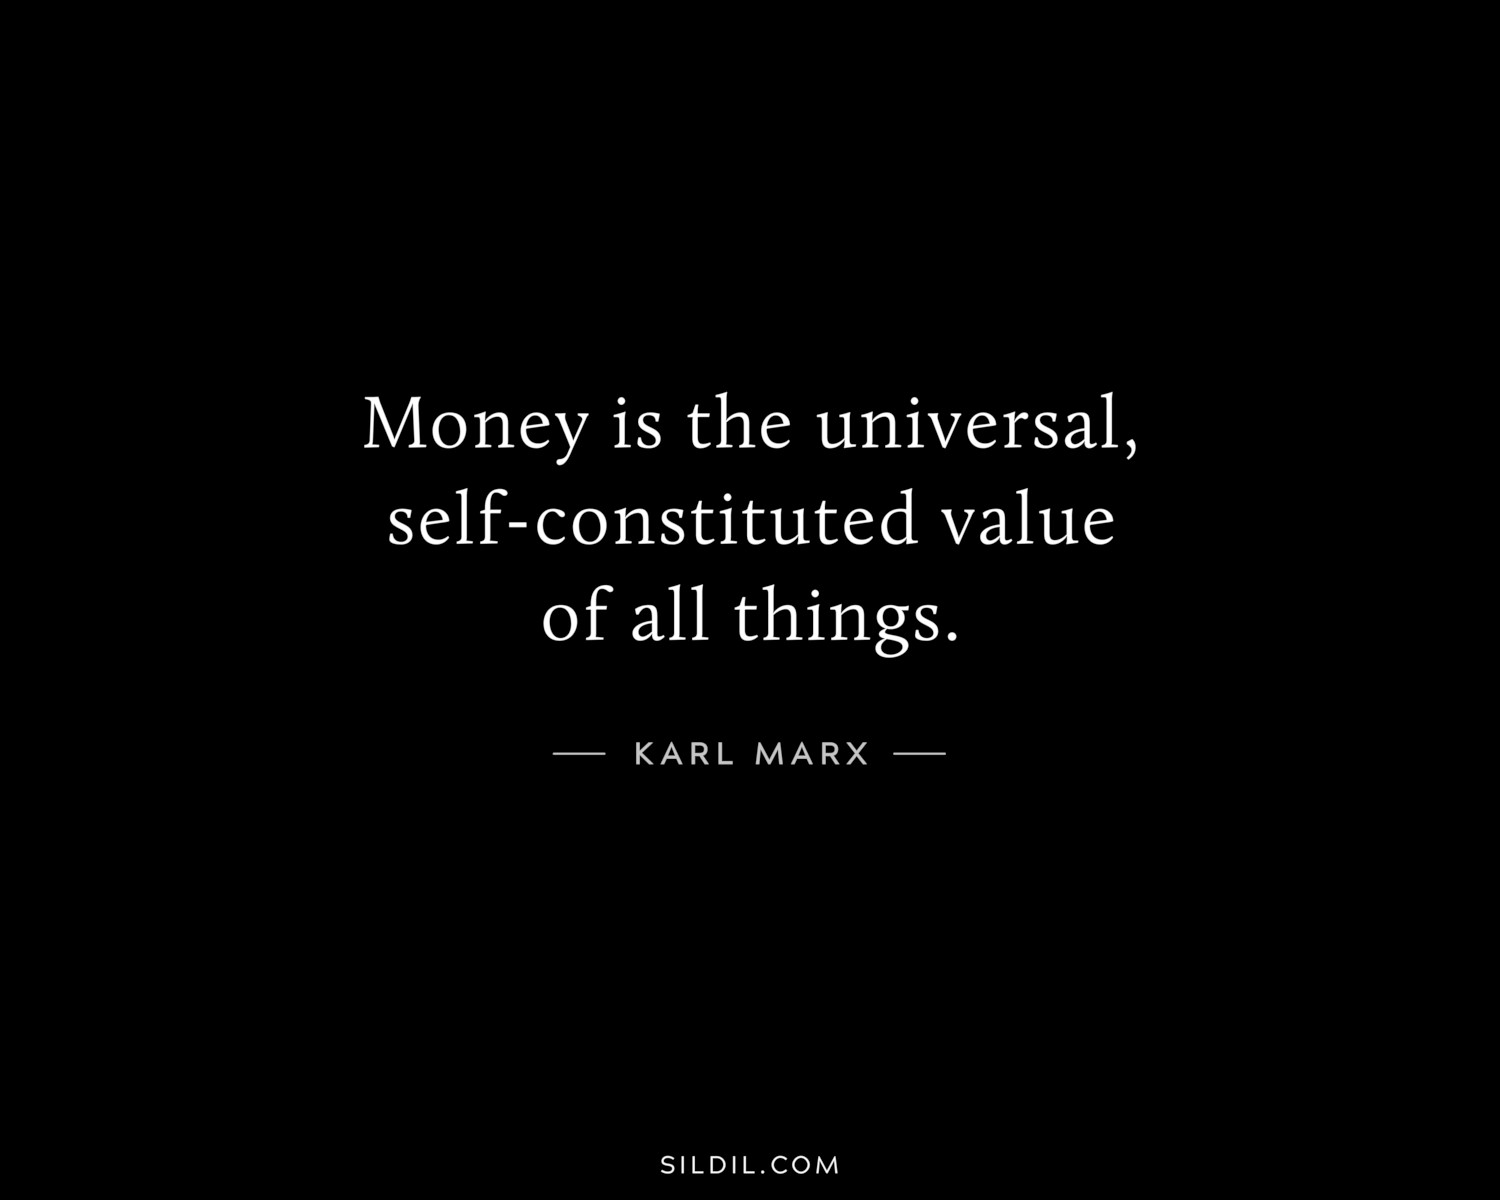 Money is the universal, self-constituted value of all things.